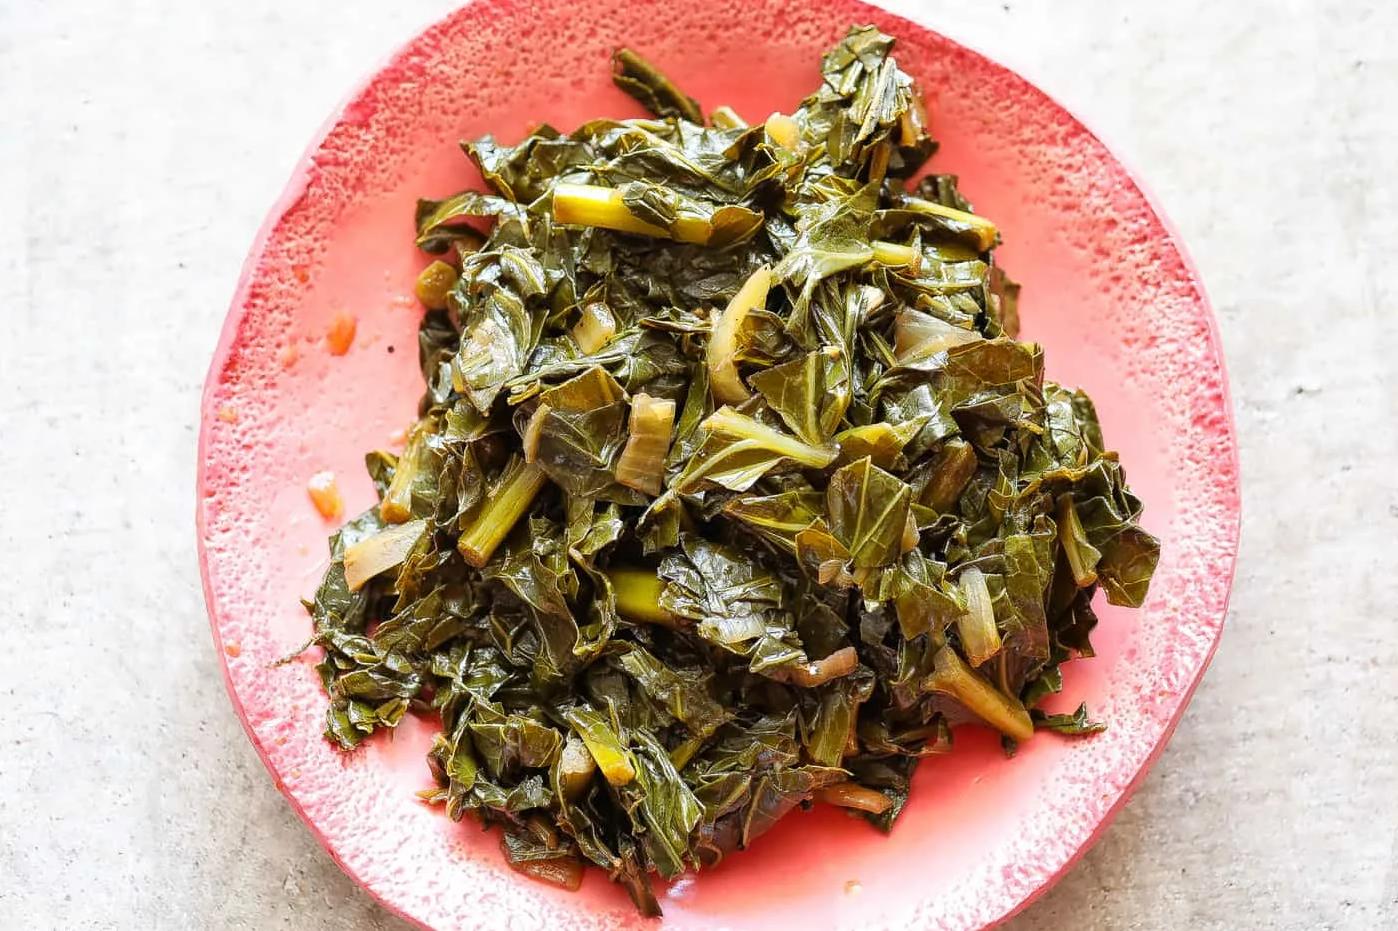  These collard greens are both vegan and gluten-free, making them perfect for any dietary restriction.